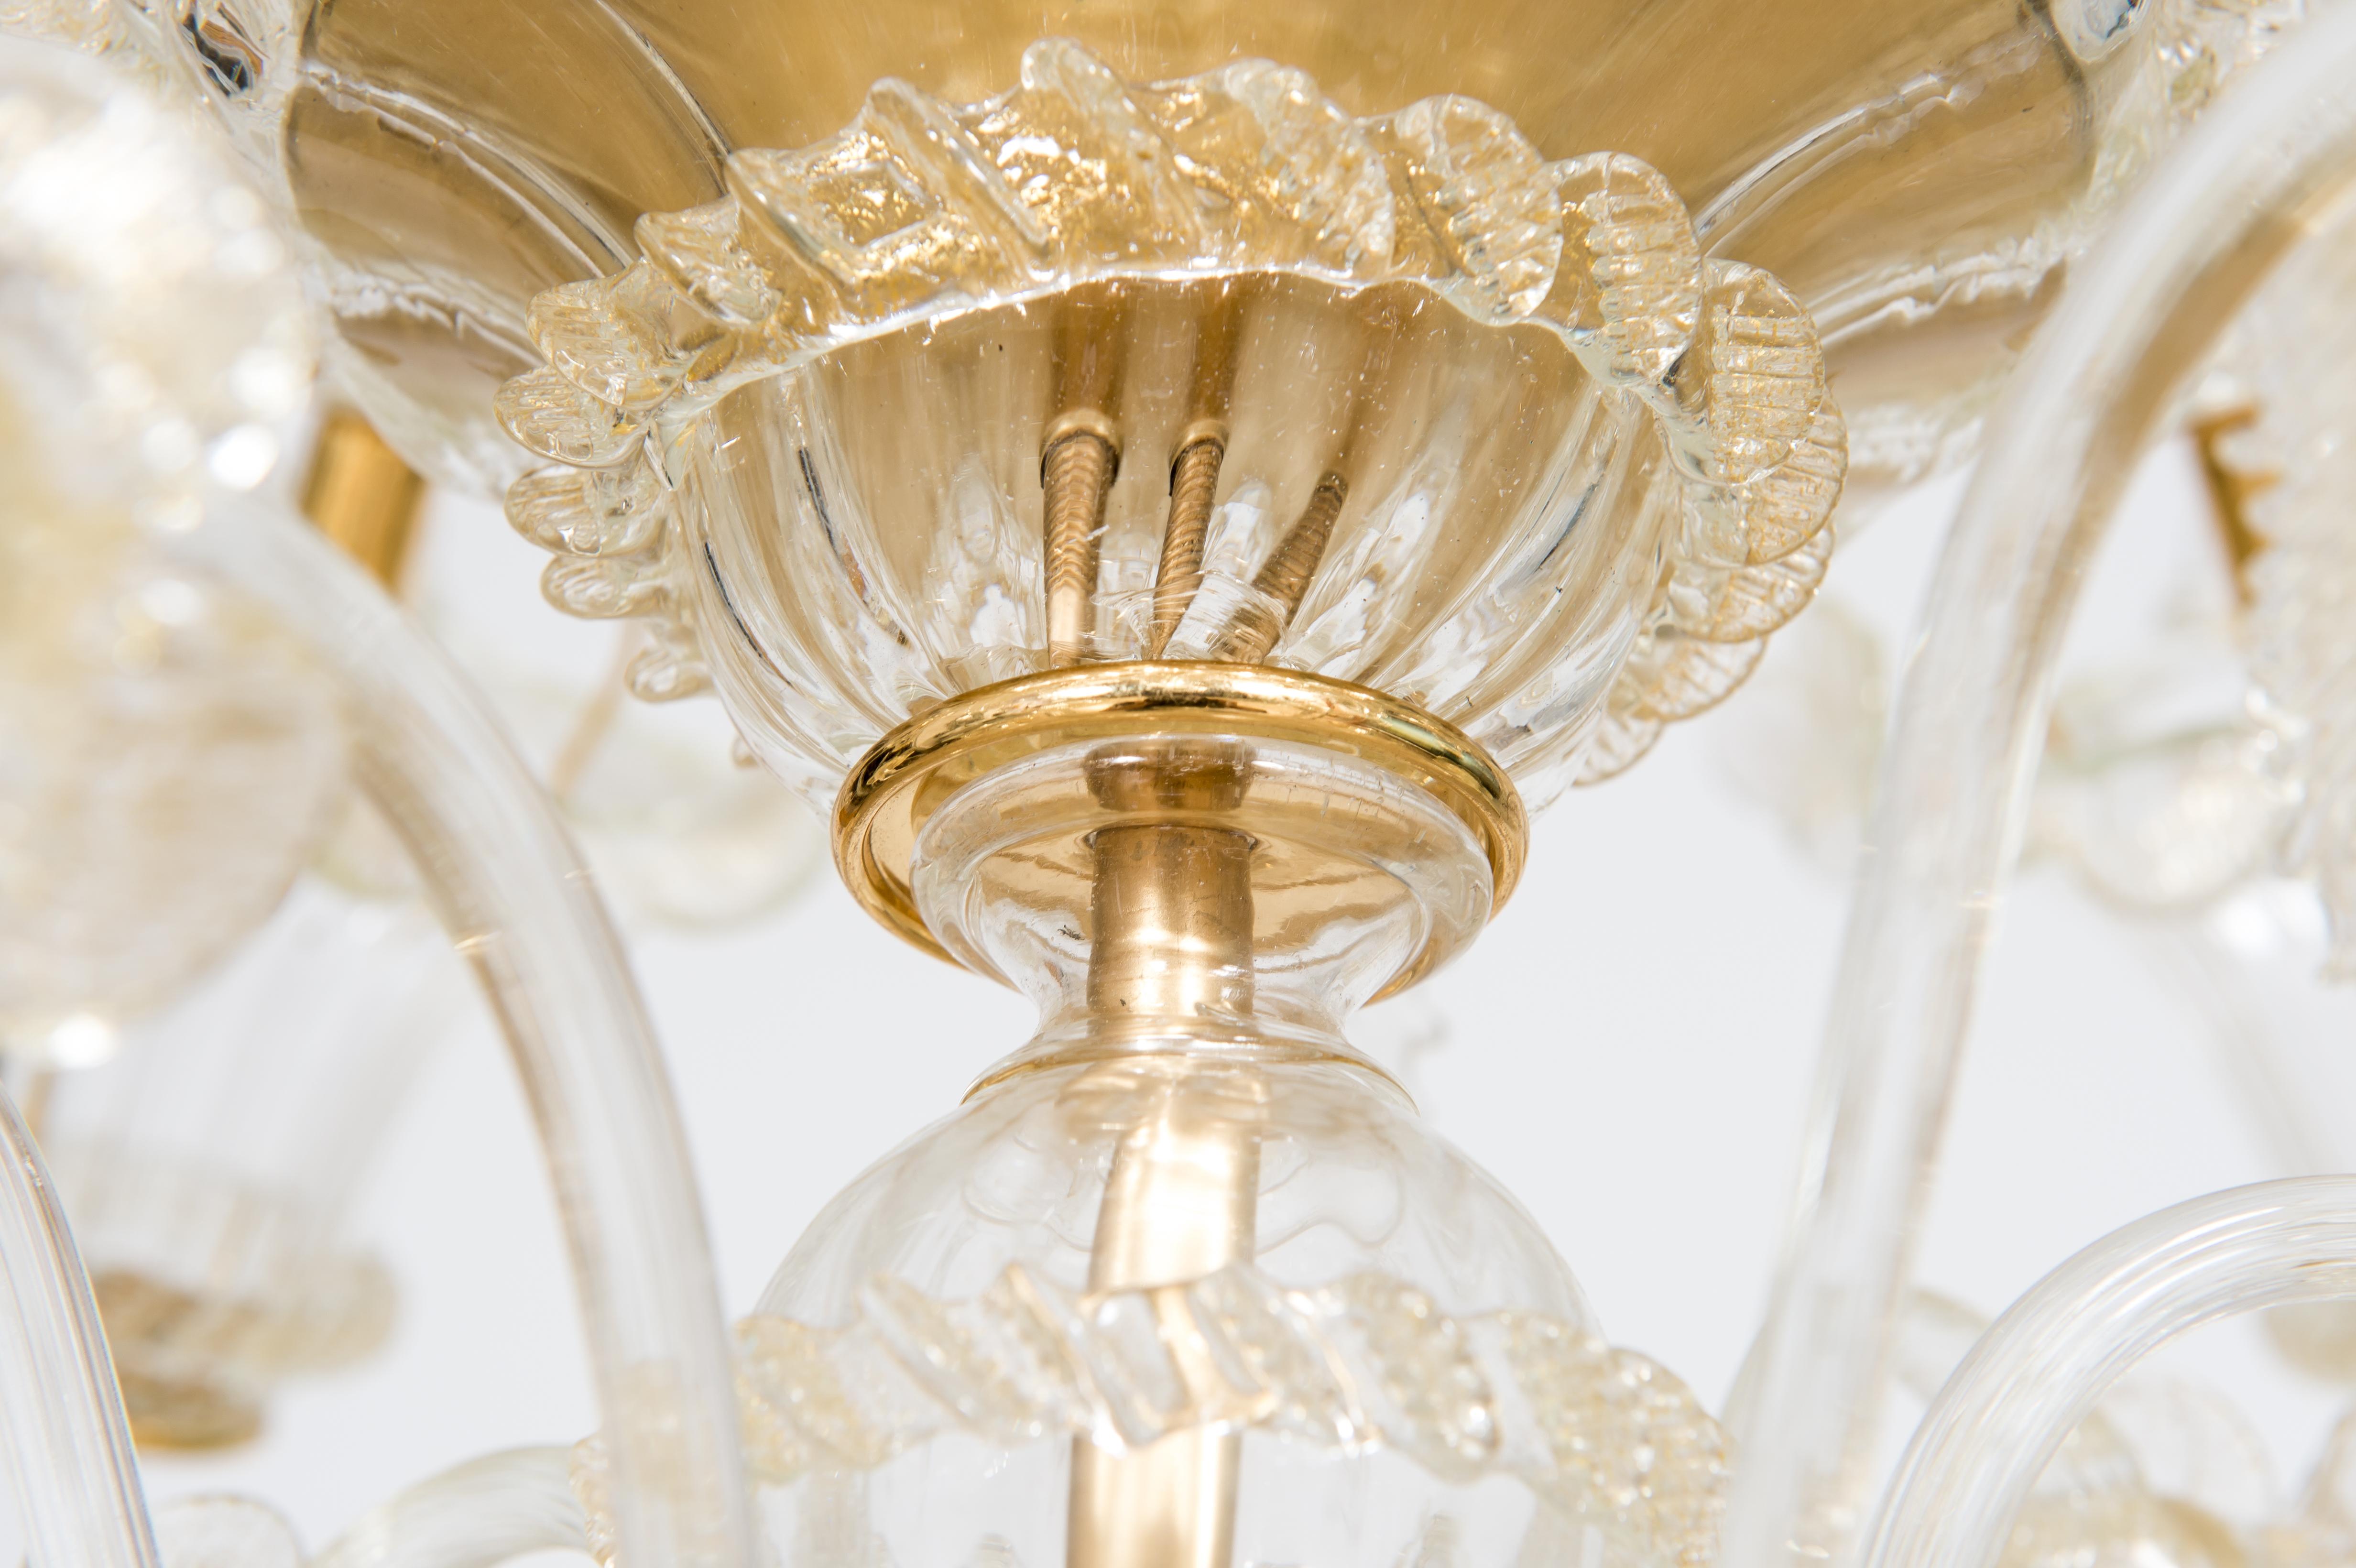 Golden Murano Glass Chandelier with 9 Lights, 21st Century, Italy For Sale 7